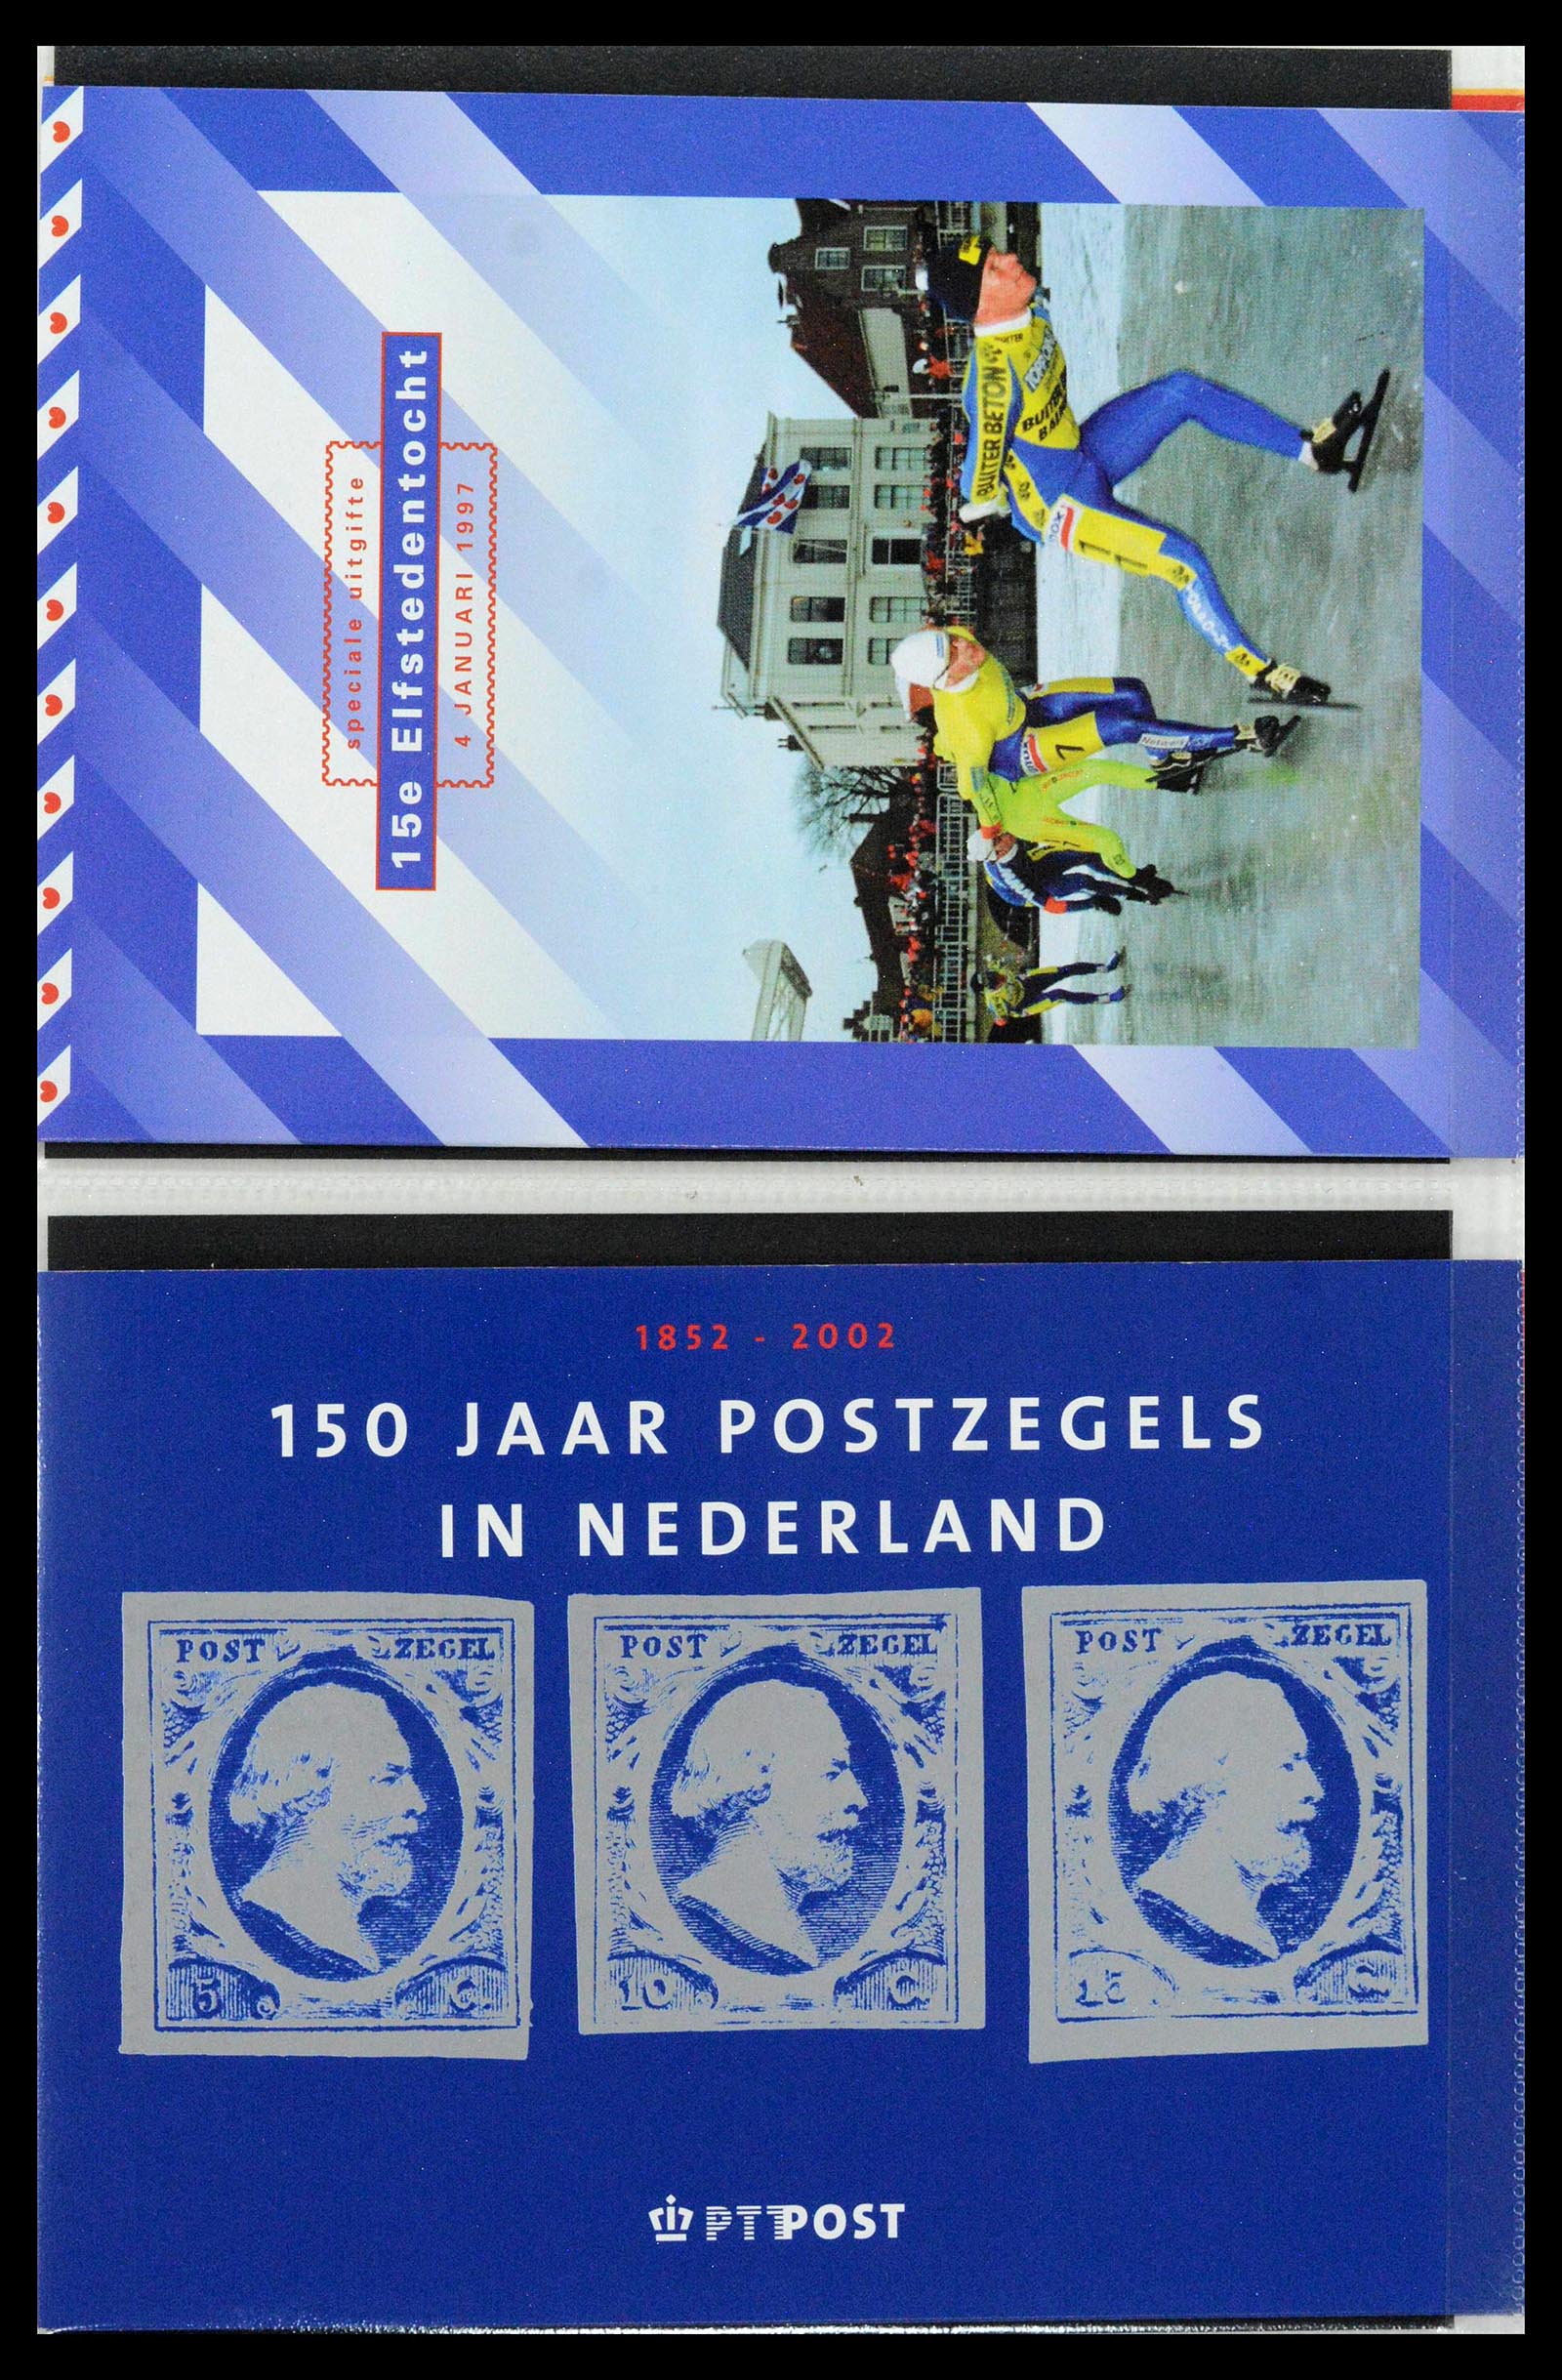 38559 0060 - Stamp collection 38559 Netherlands special first day covers.